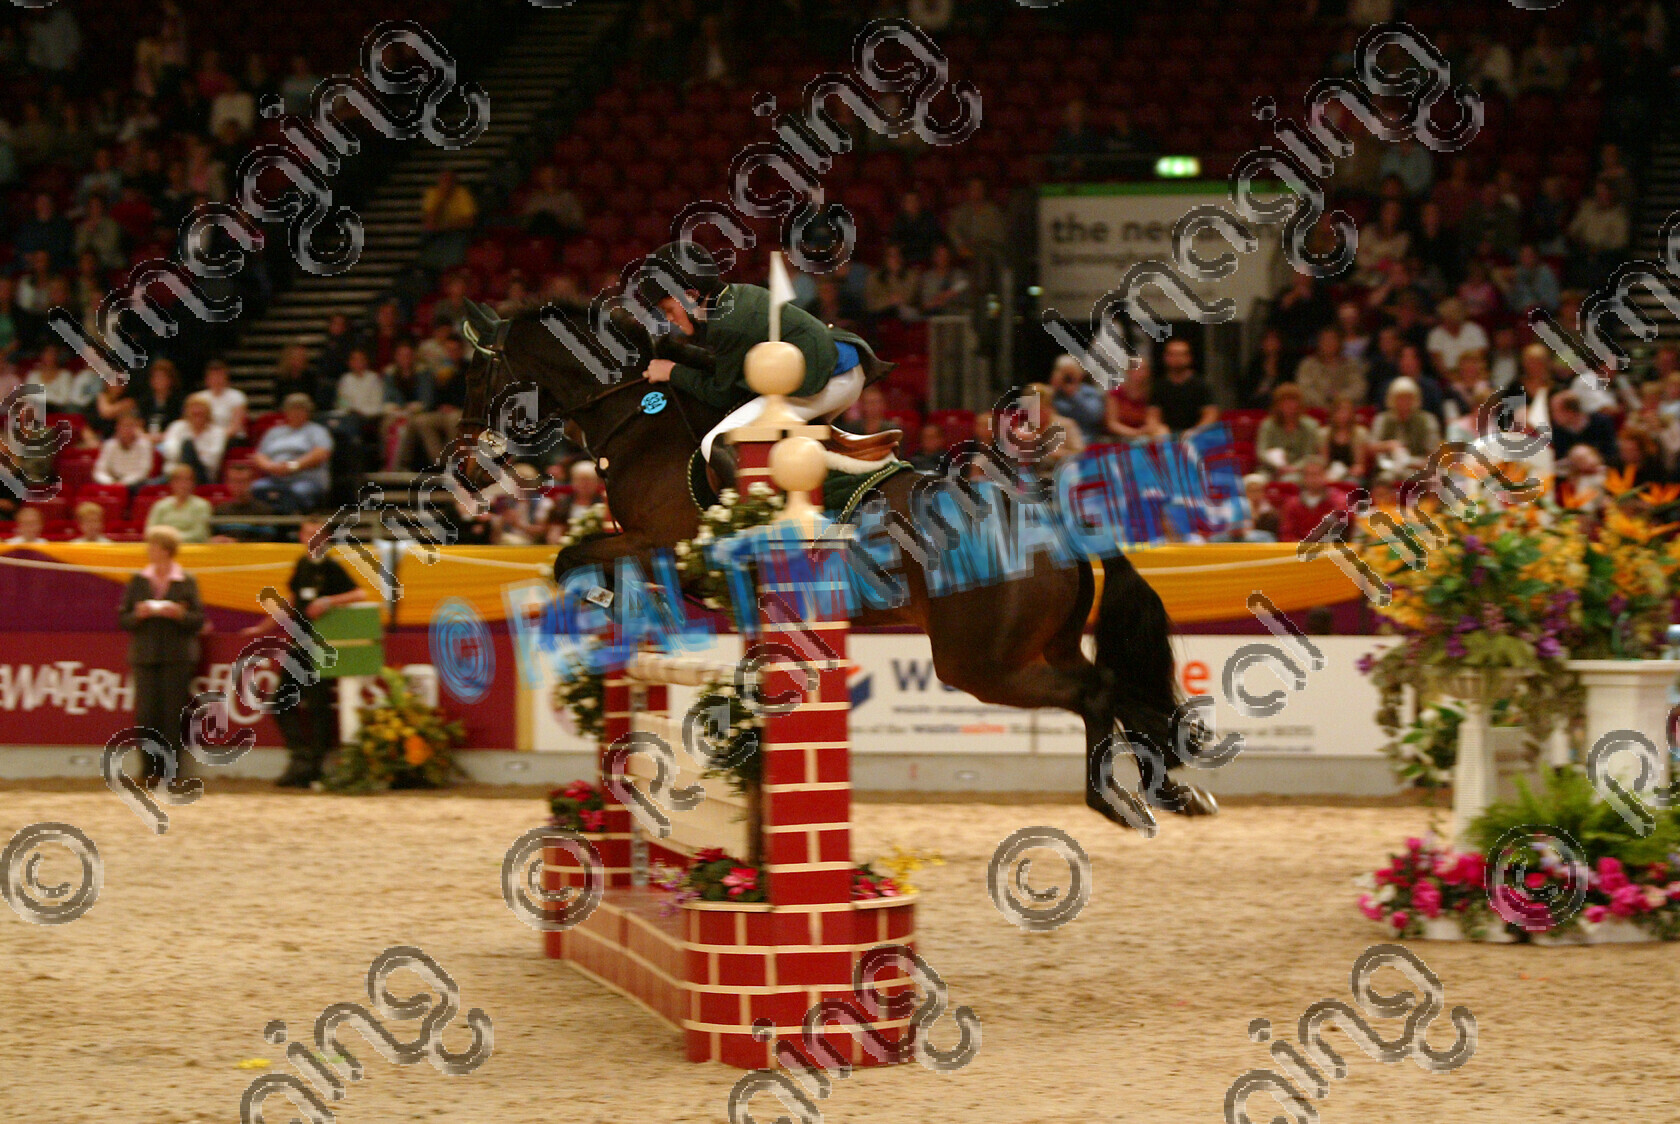 S05-67-T4-075 
 HOYS 2005: Charles Owen HOYS 138cms Champion 
 Keywords: horse of the year show 2005 05 hoys saturday 15 10 october 11 Charles Owen HOYS 138cms Champion 334 Fountain Ranger James Smith bay jump jumping fence action showjumping showjumper